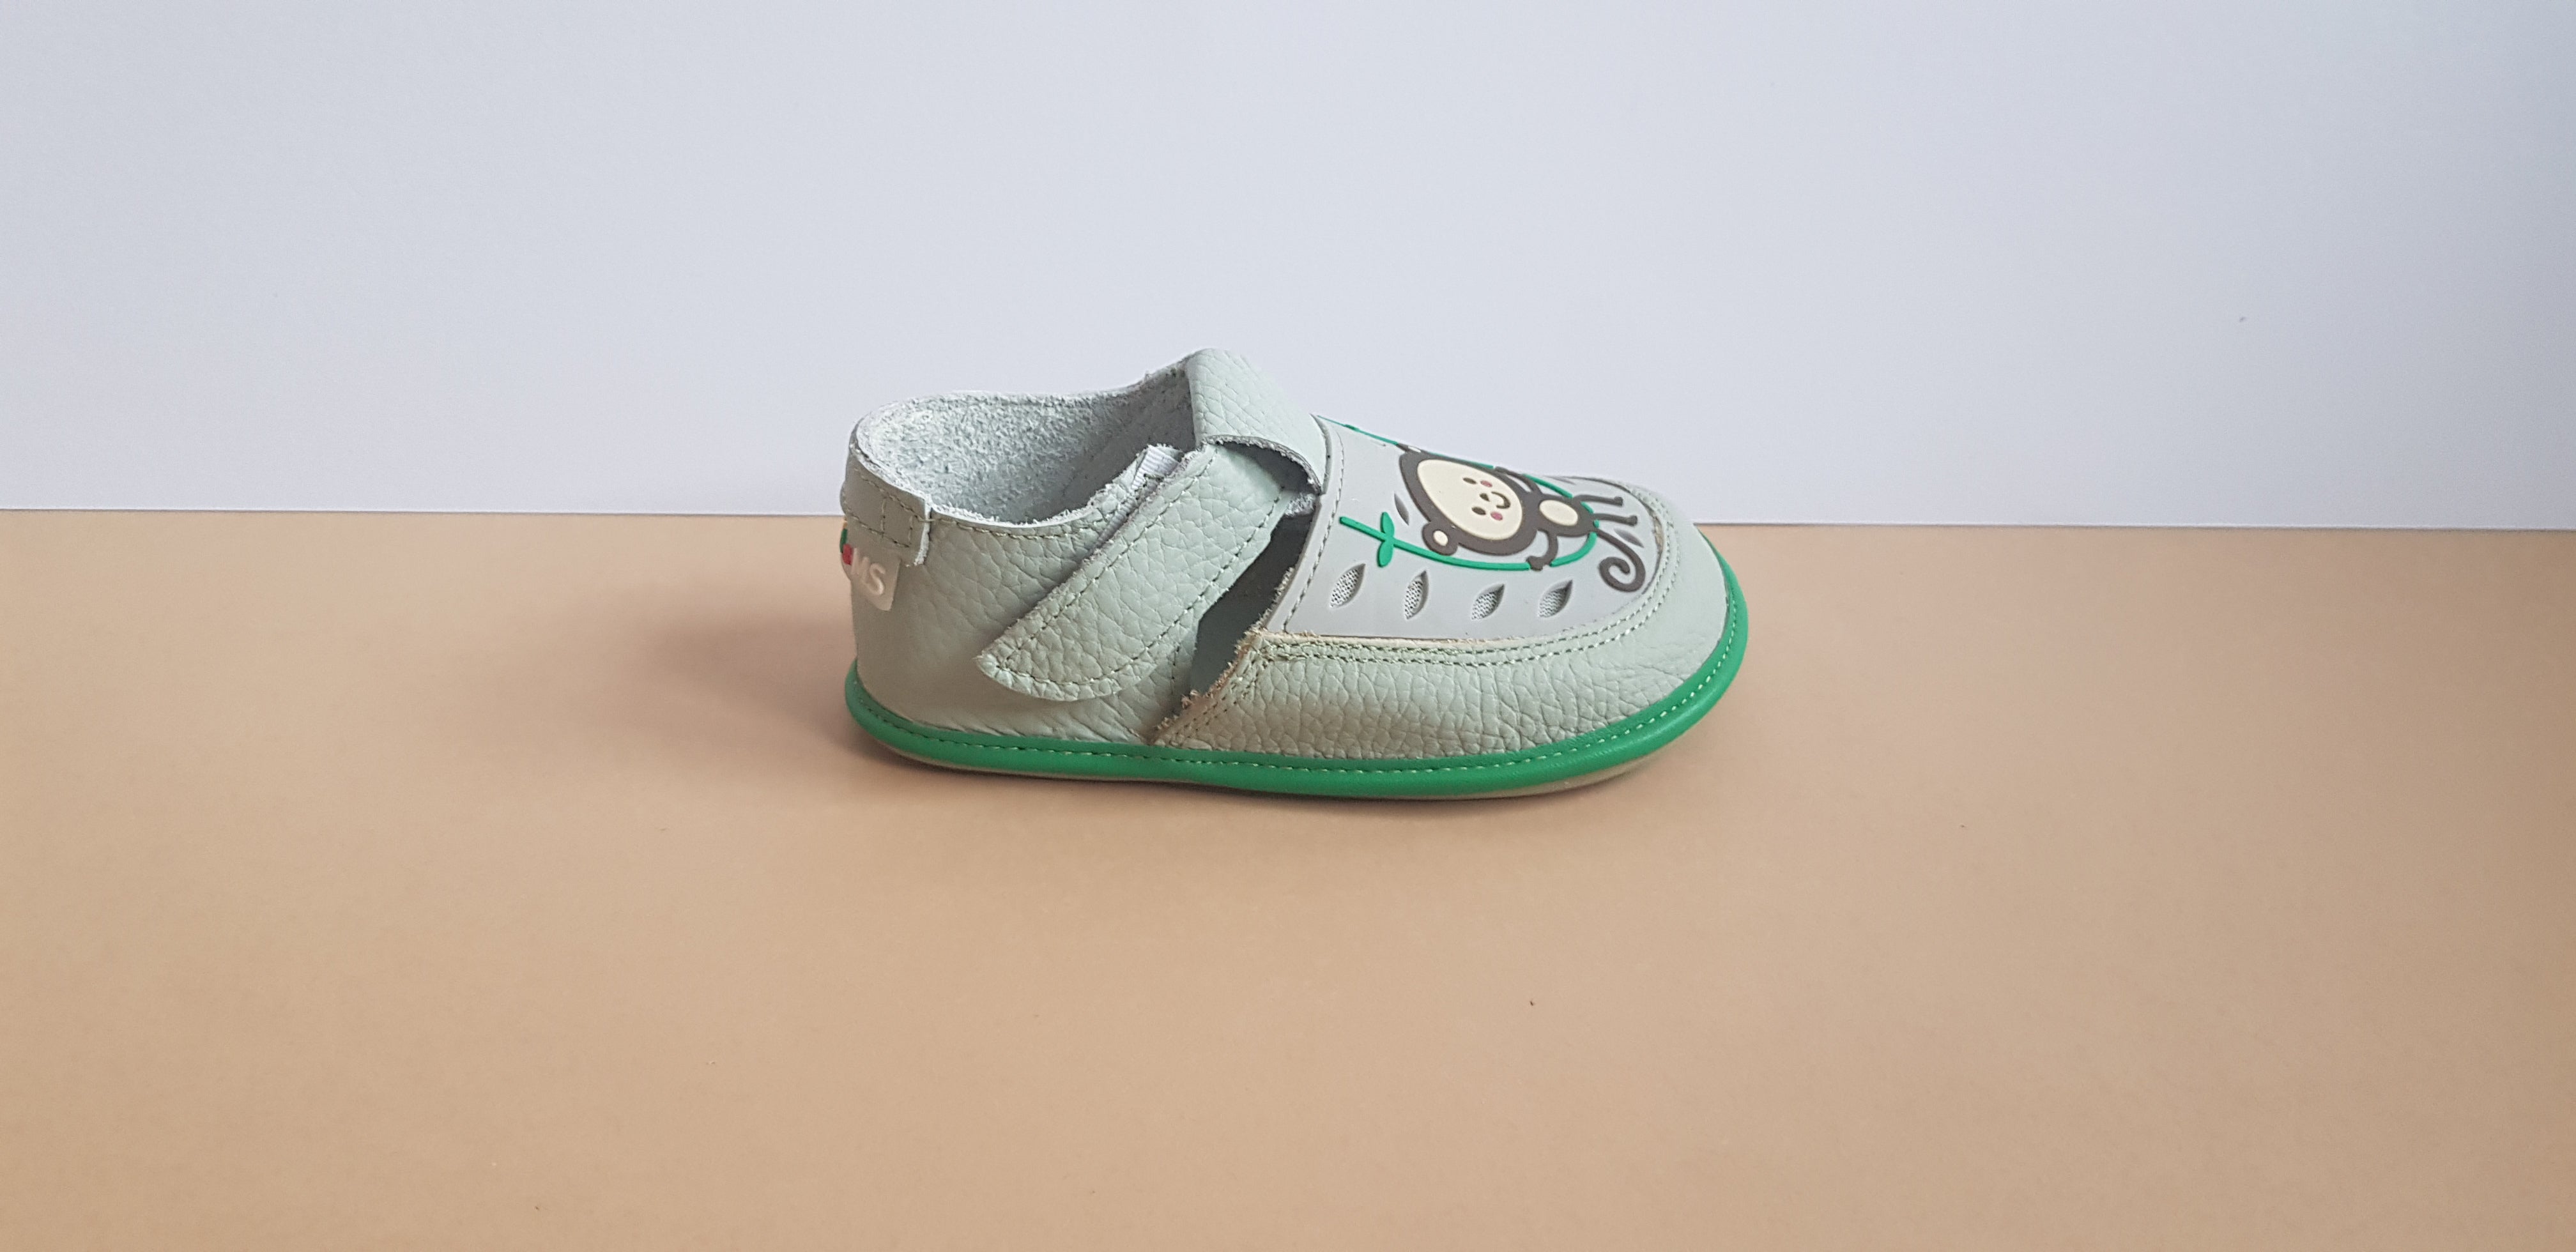 Barefoot leather Flexible kids shoes, anatomically shaped with a monkey motive